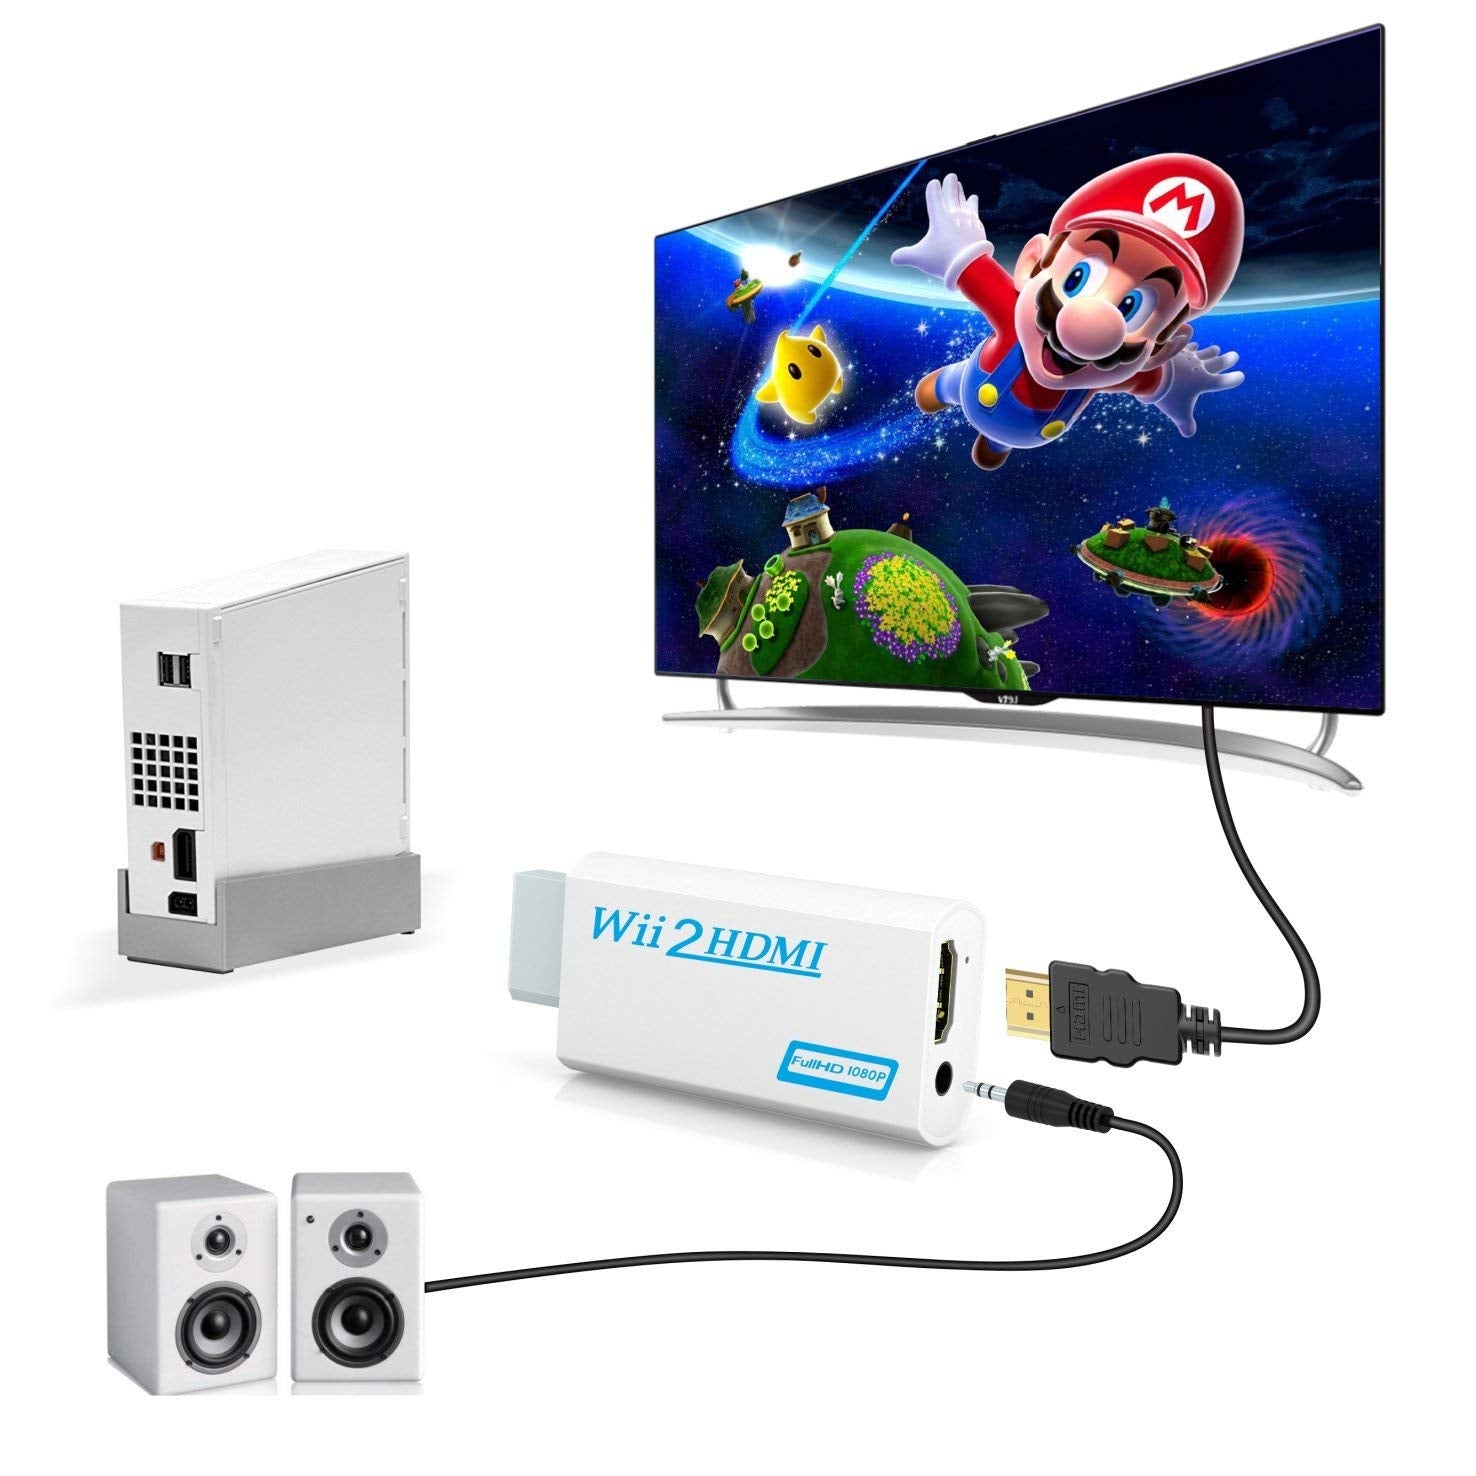 to hdmi Converter, Gana wii to hdmi Adapter, wii to hdmi1080p 720p – GANA LINK